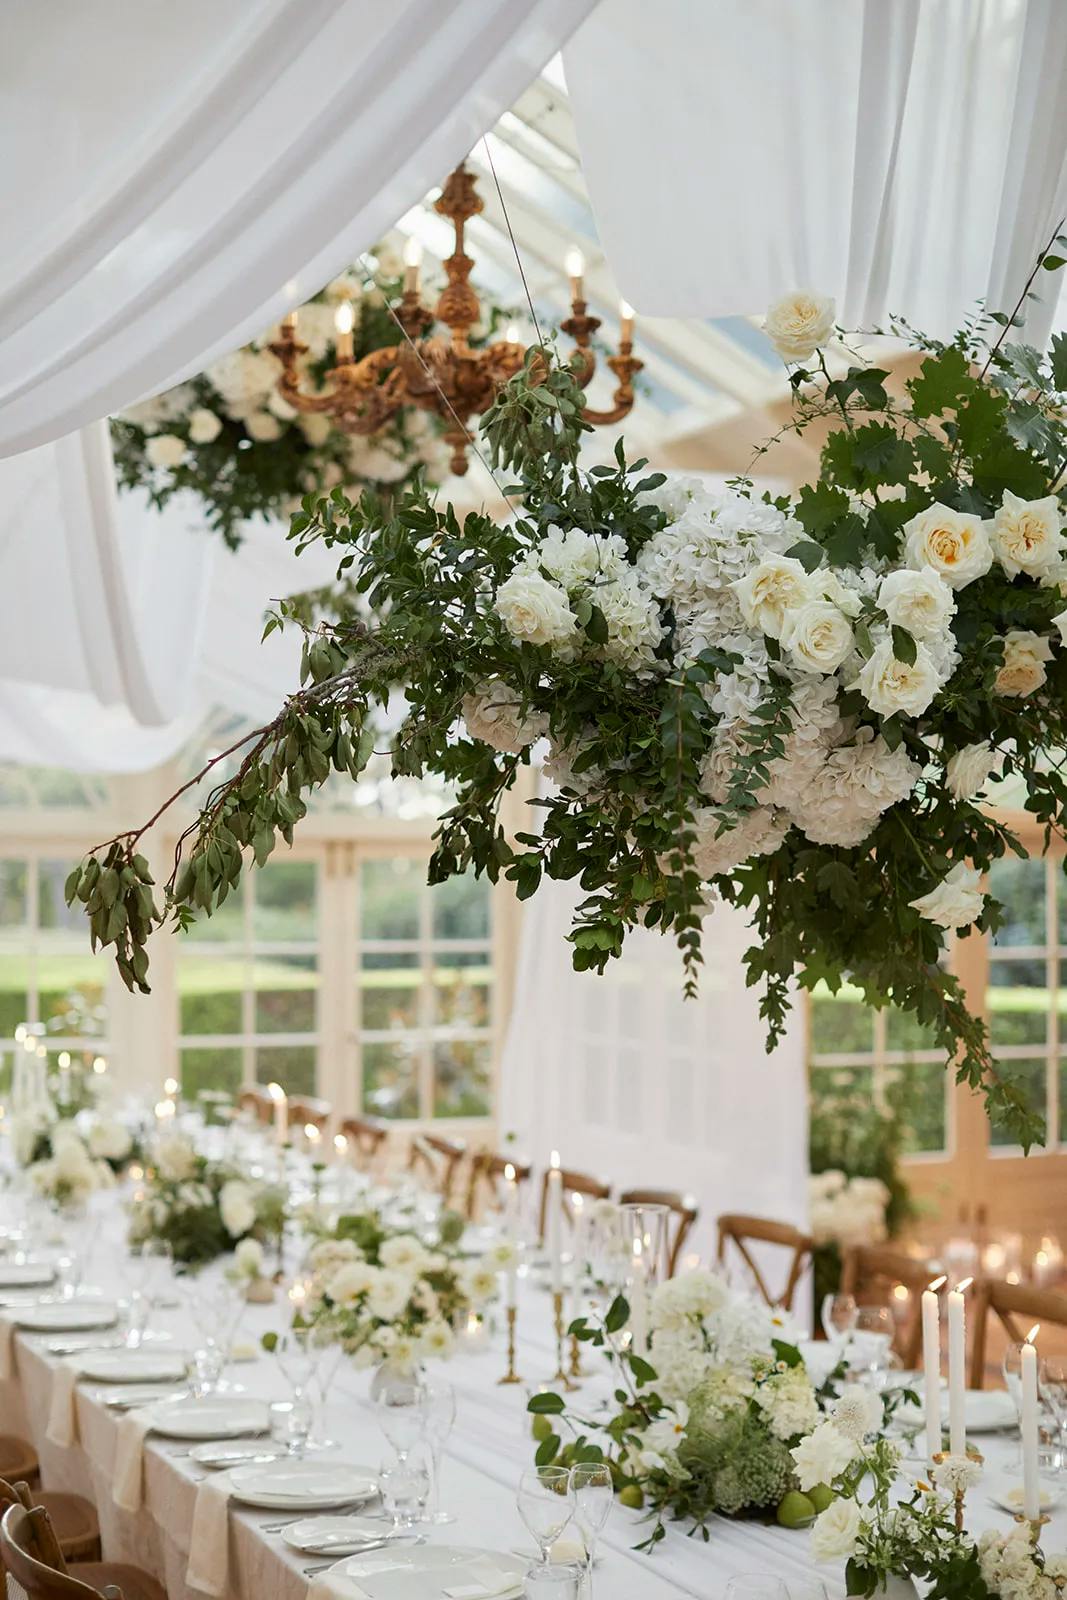 Wedding reception with hanging flowers